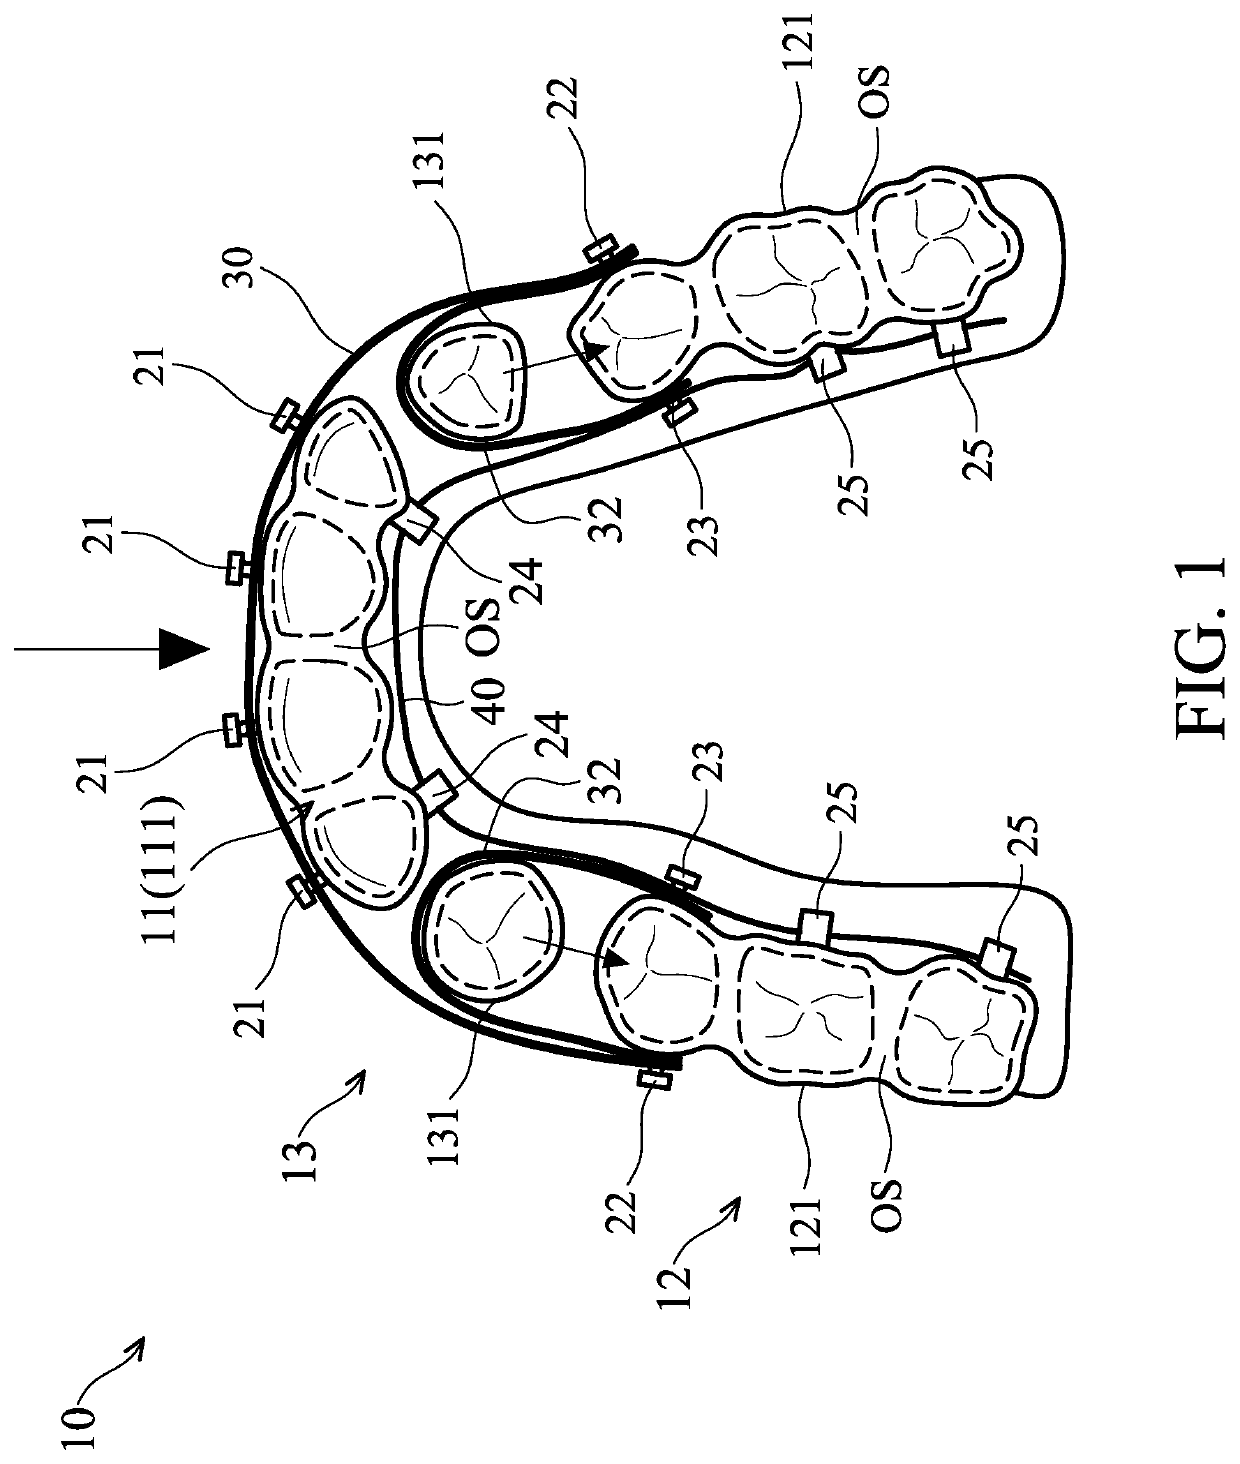 Orthodontic space closure device